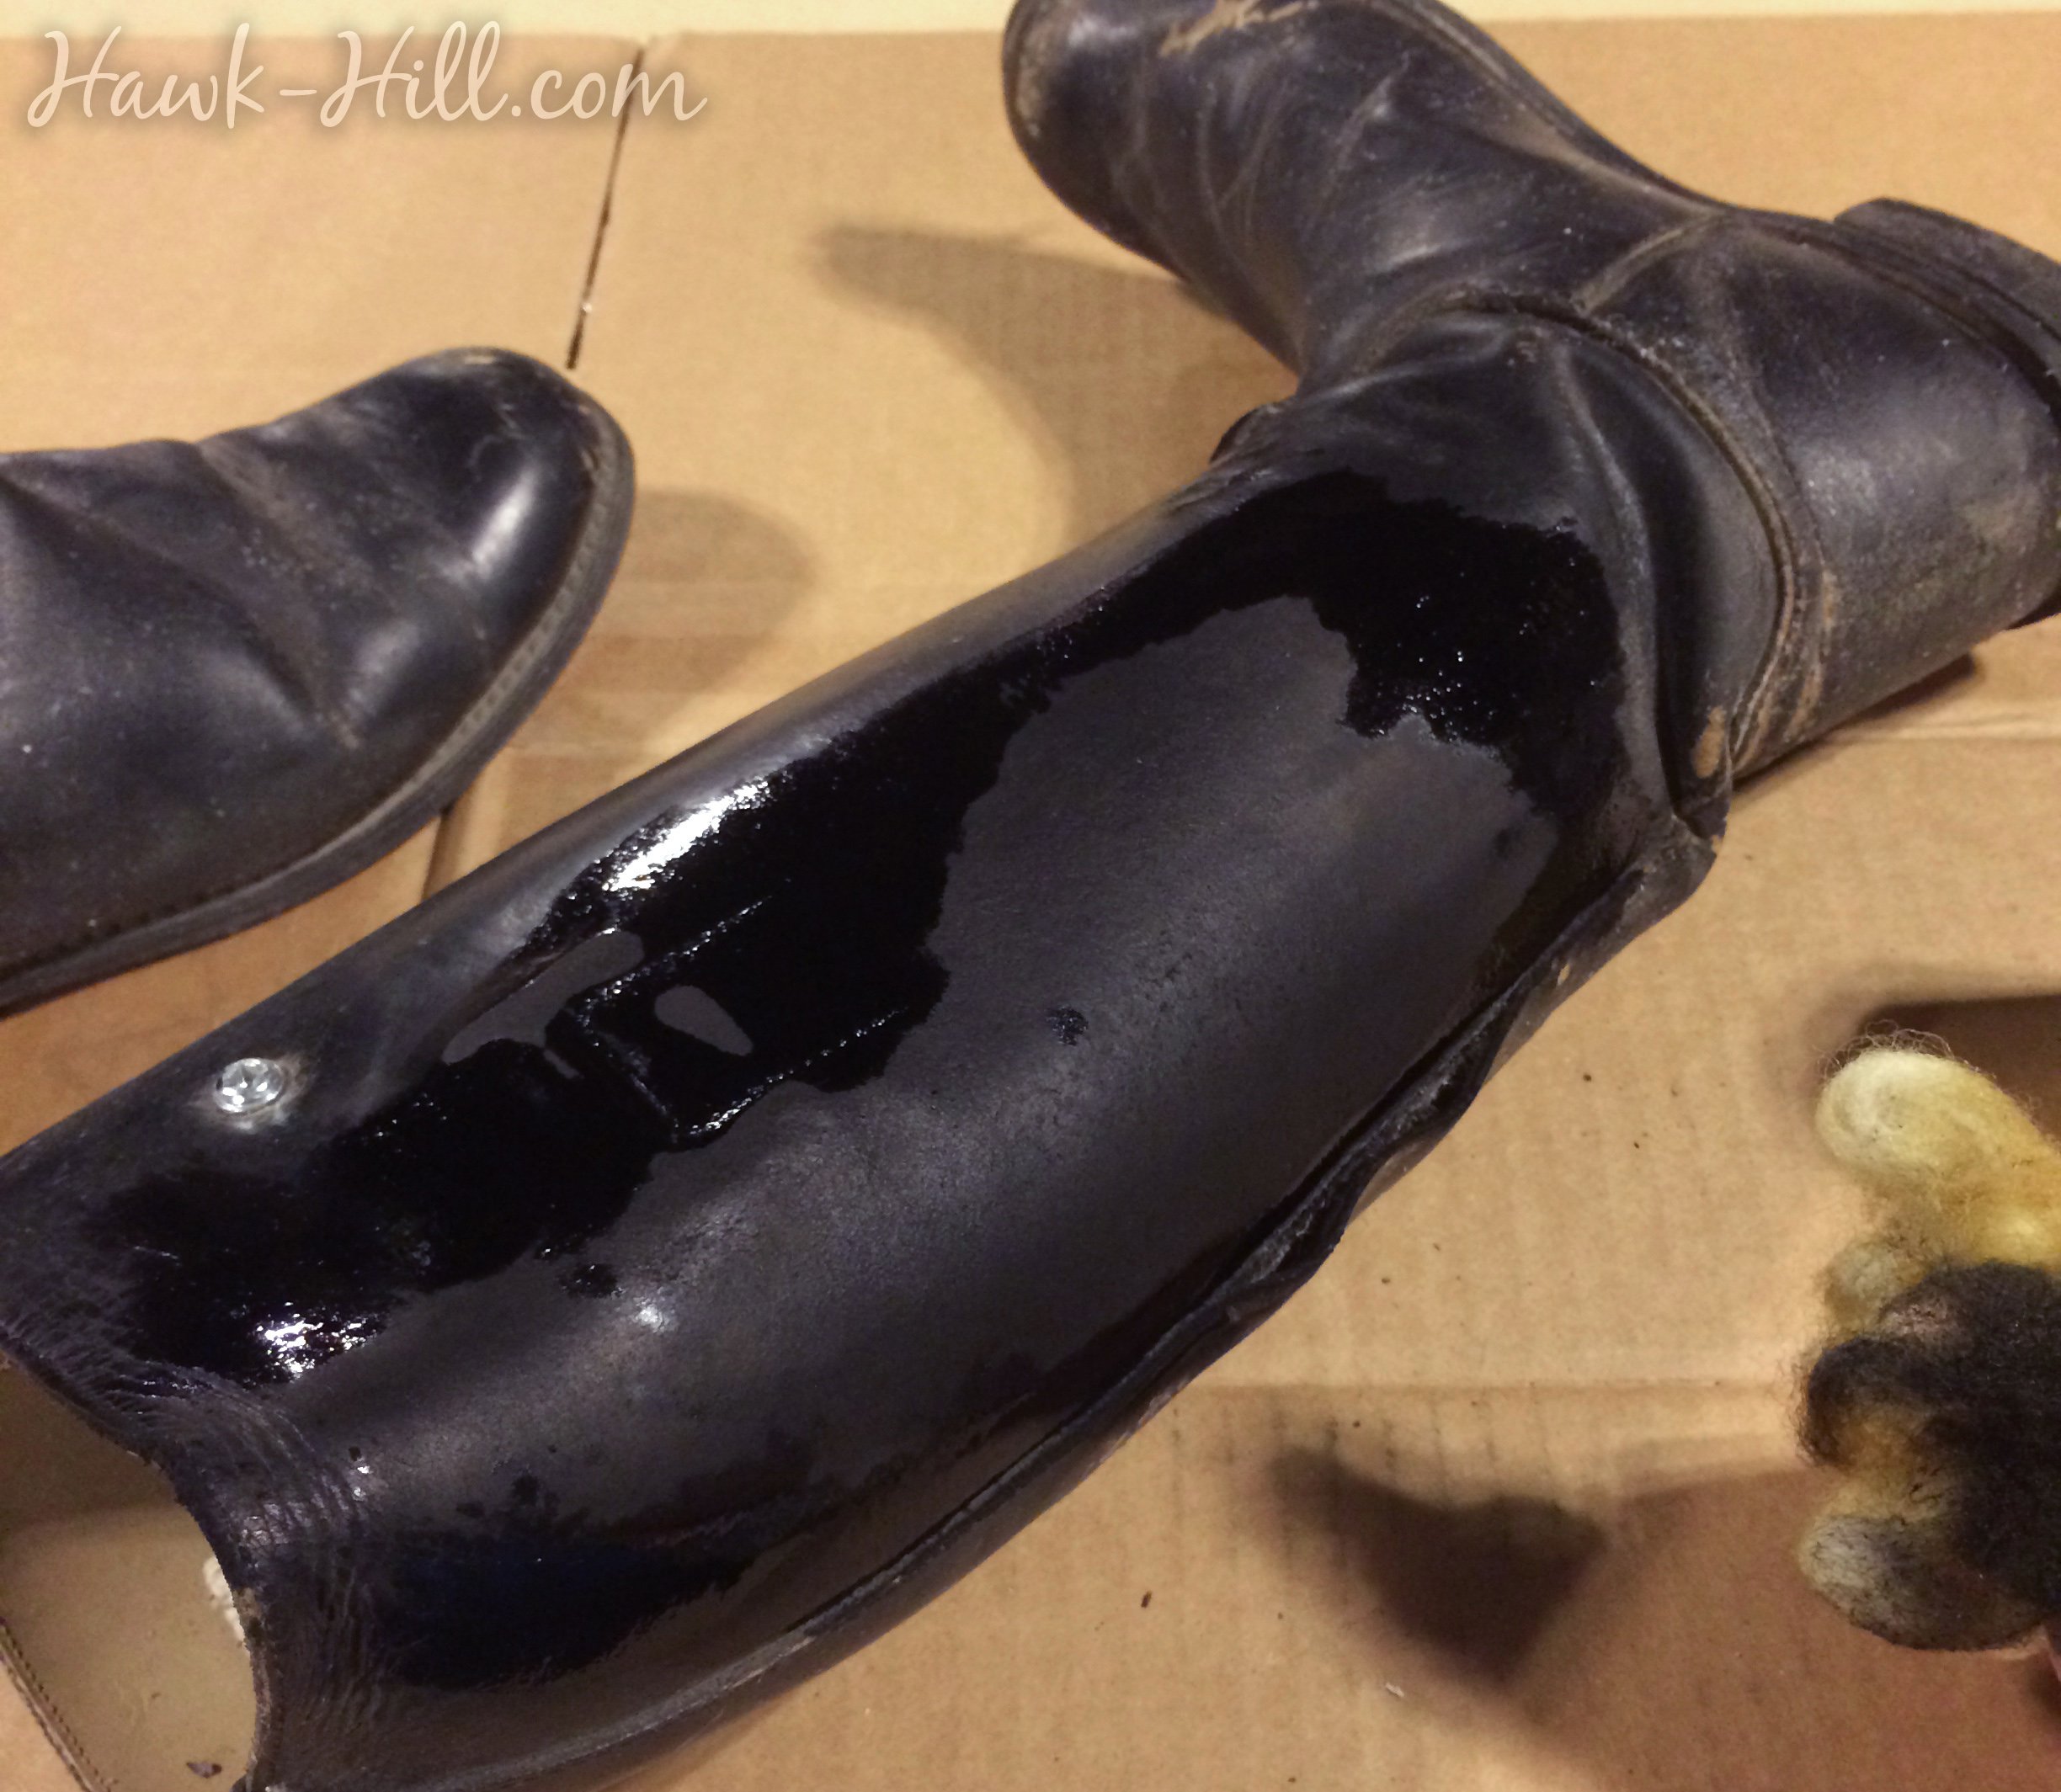 leather dye soaking in to worn patches on an old black riding boot